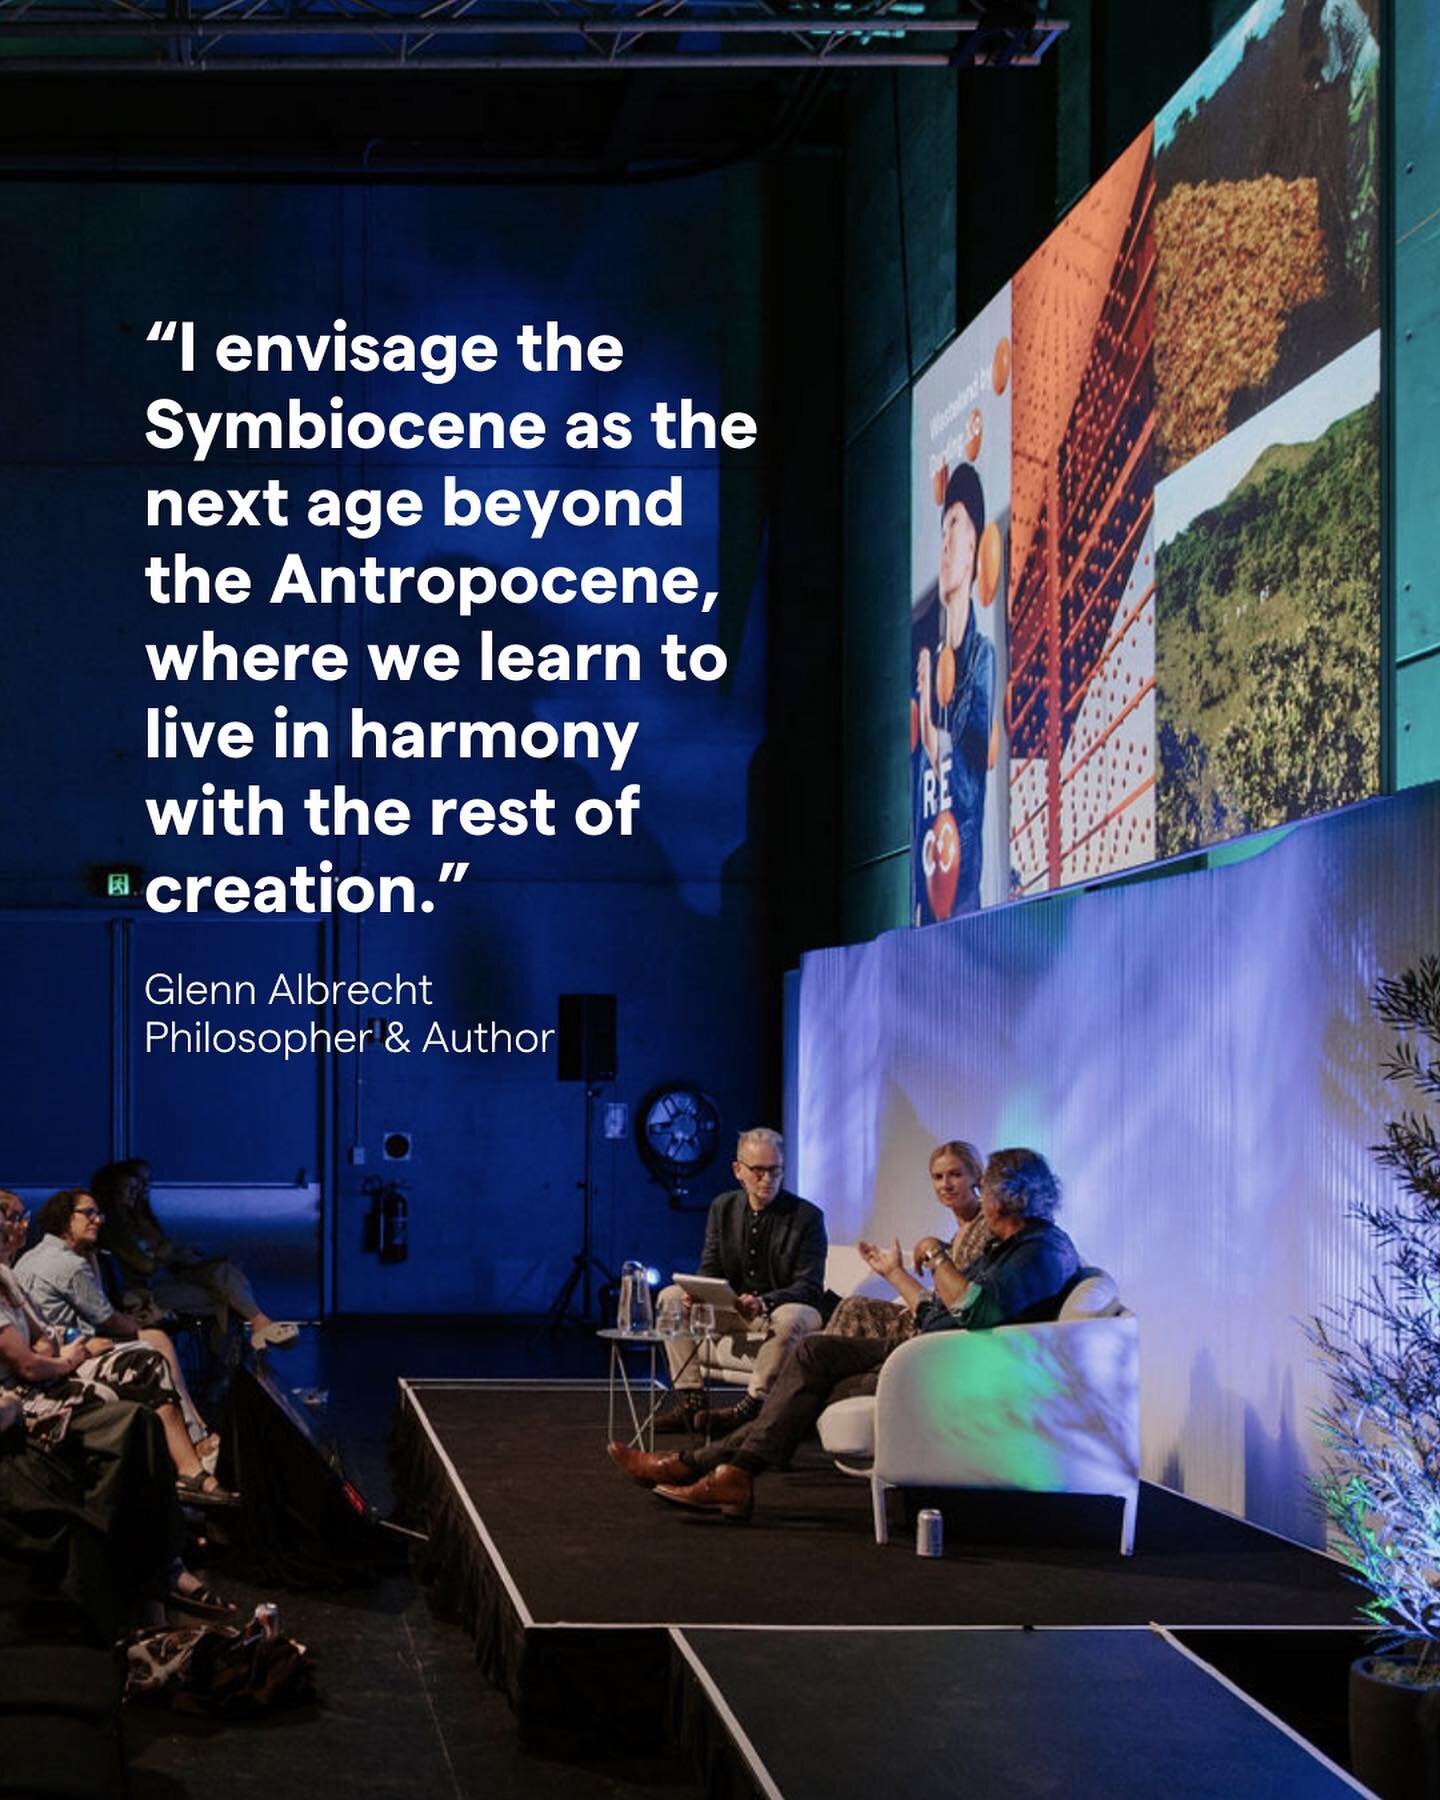 Our MC @shantelwetherall explained that the Symbiocene allows us to label this new era of collective connectedness and togetherness, and that it empowers our active hope.&quot;

Inspired by @glenn.a.albrecht  closing session at Purpose 2022, we desig